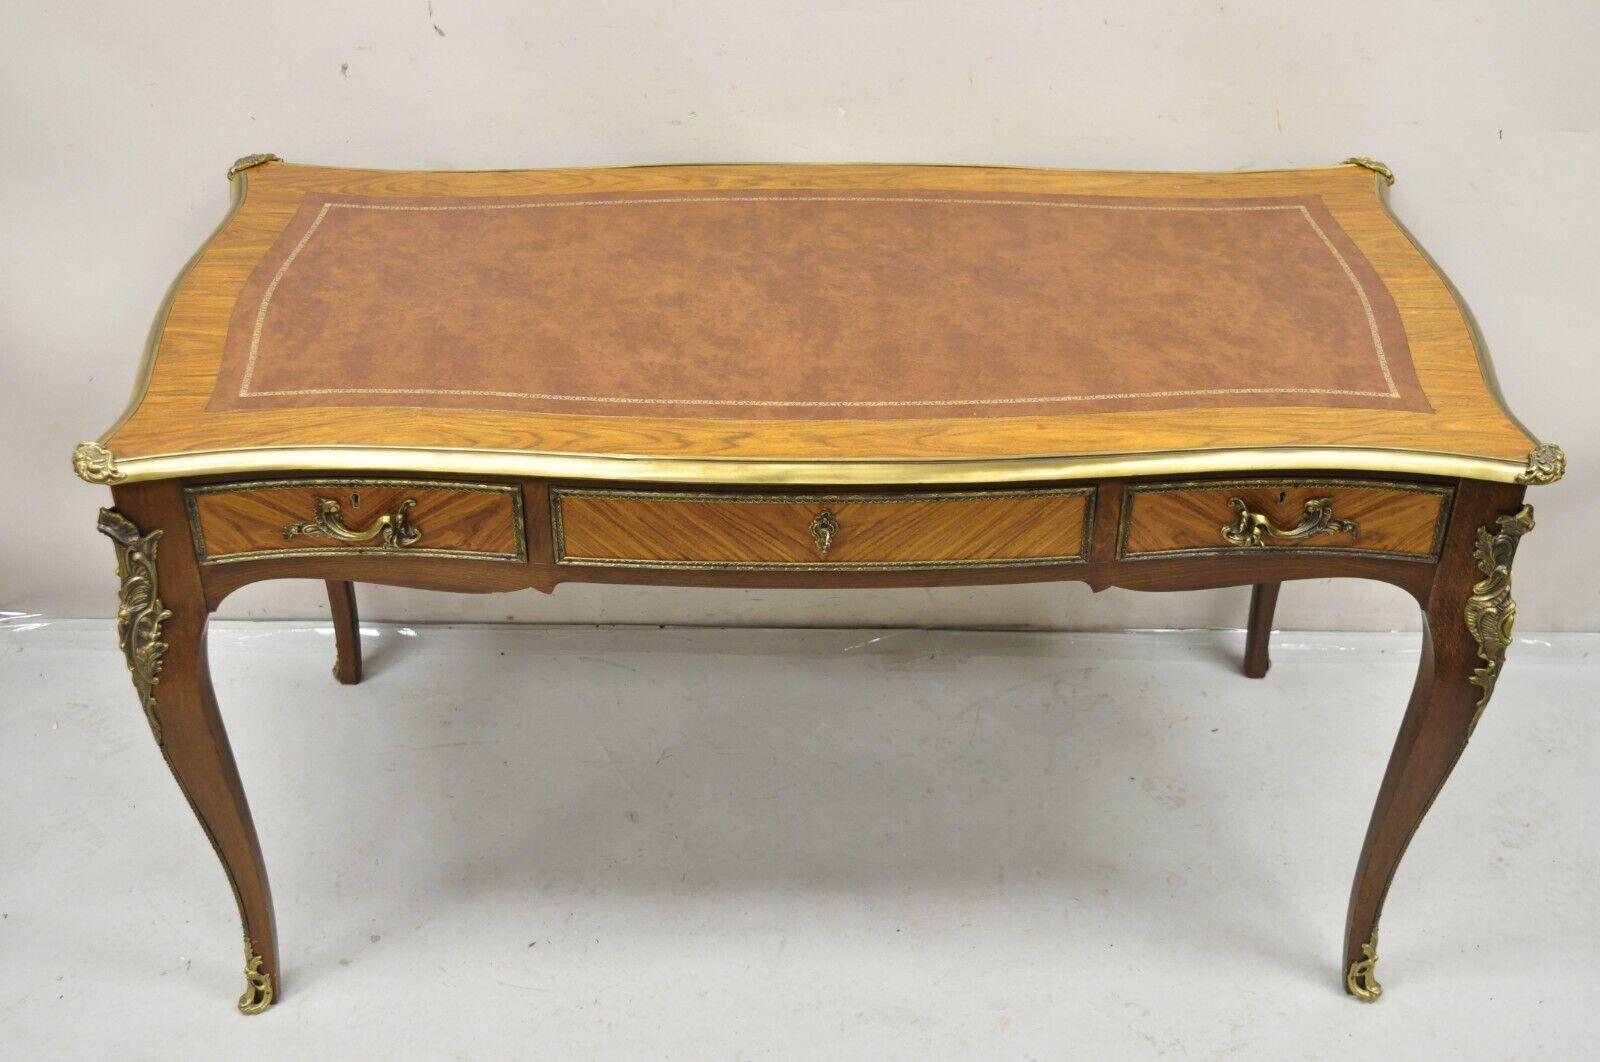 Vintage French Louis XV Style Walnut Leather Top Bronze Ormolu Writing Desk. Item features a working lock and key, 3 faux drawers to rear, bronze ormolu, tooled leather top, beautiful wood grain, very nice vintage item. Circa Mid 20th Century.